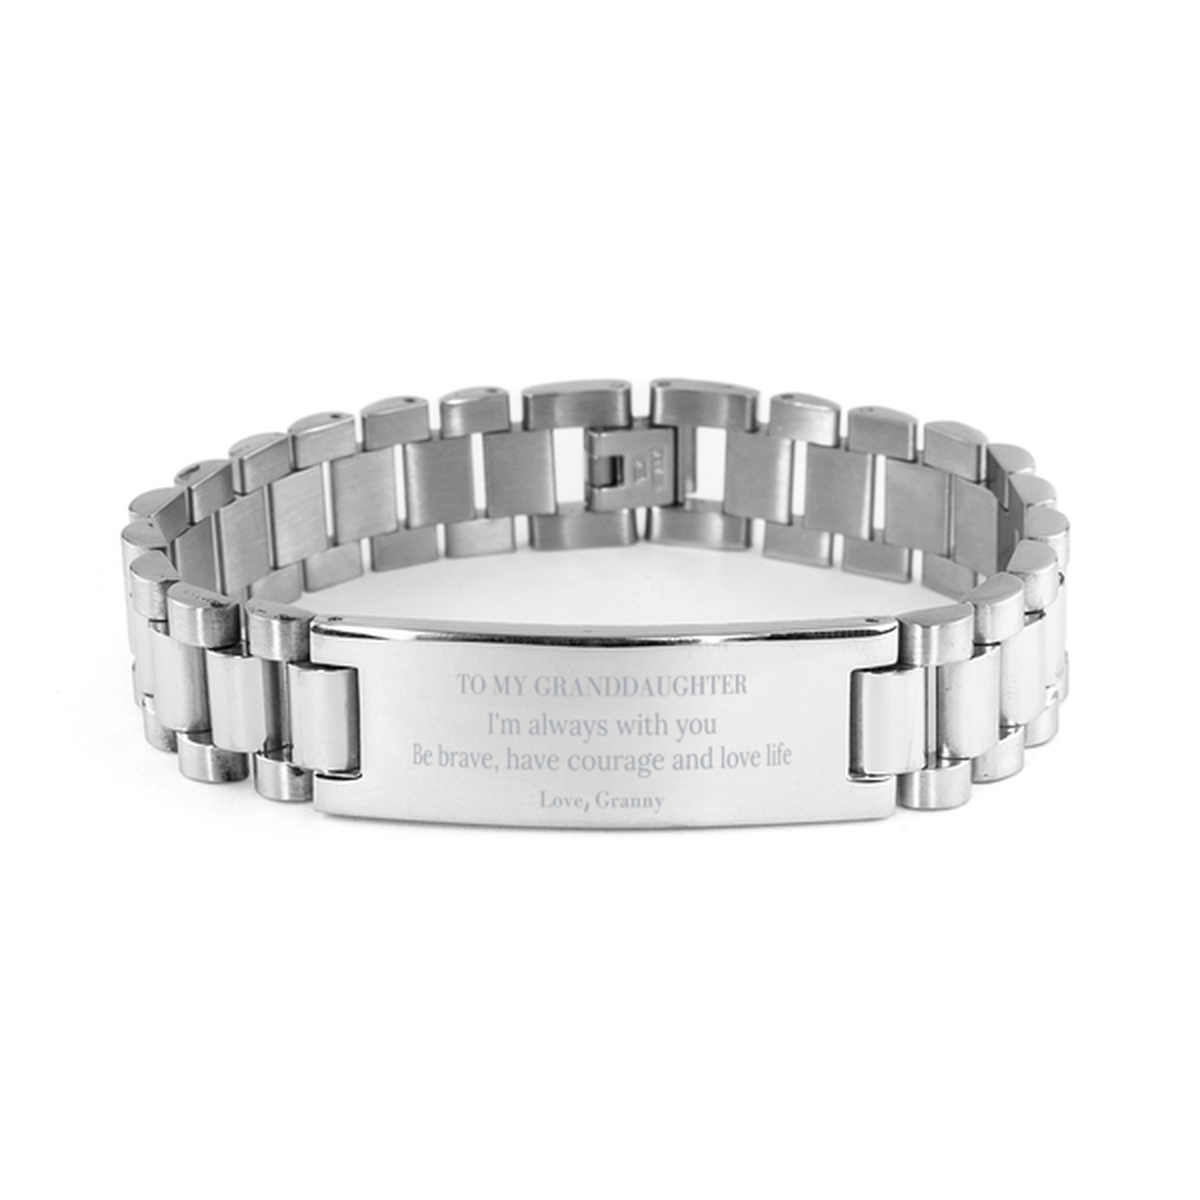 To My Granddaughter Gifts from Granny, Unique Ladder Stainless Steel Bracelet Inspirational Christmas Birthday Graduation Gifts for Granddaughter I'm always with you. Be brave, have courage and love life. Love, Granny